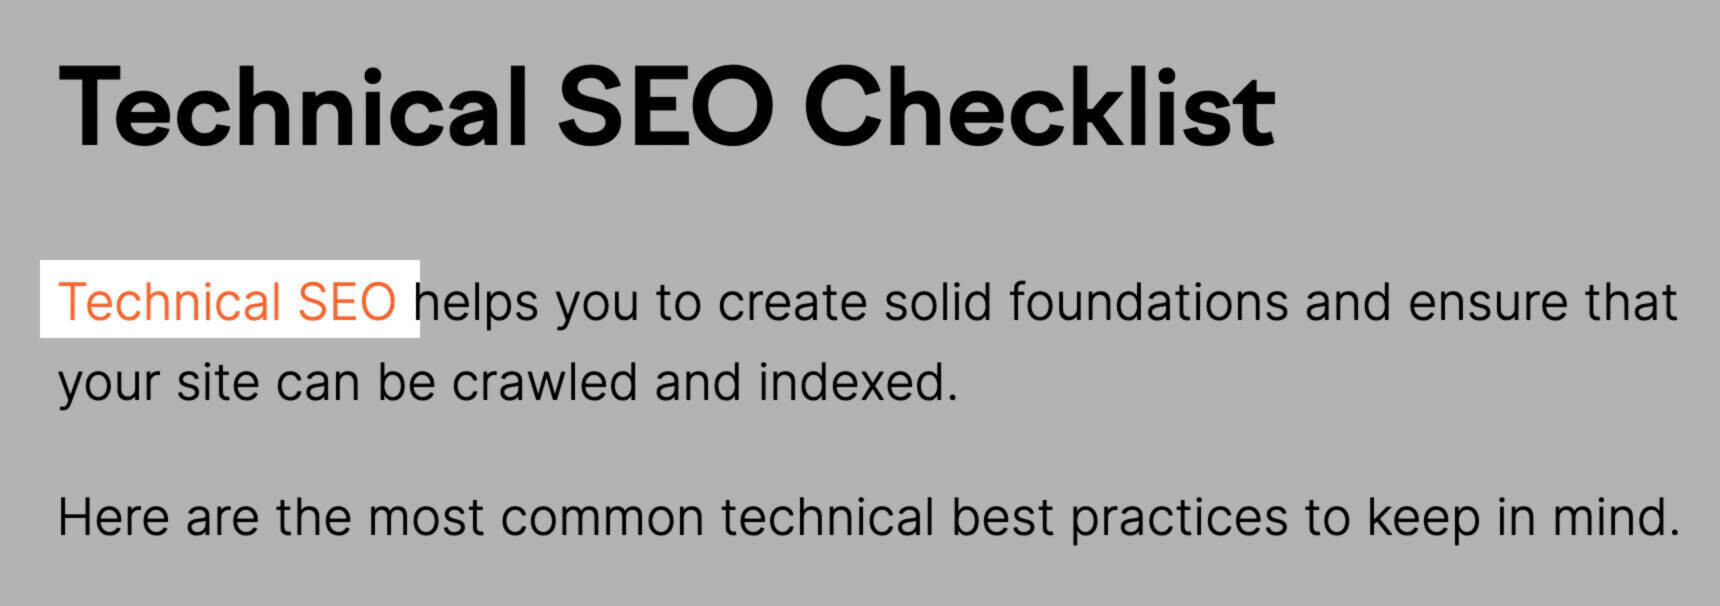 Internal link with anchor text "Technical SEO"